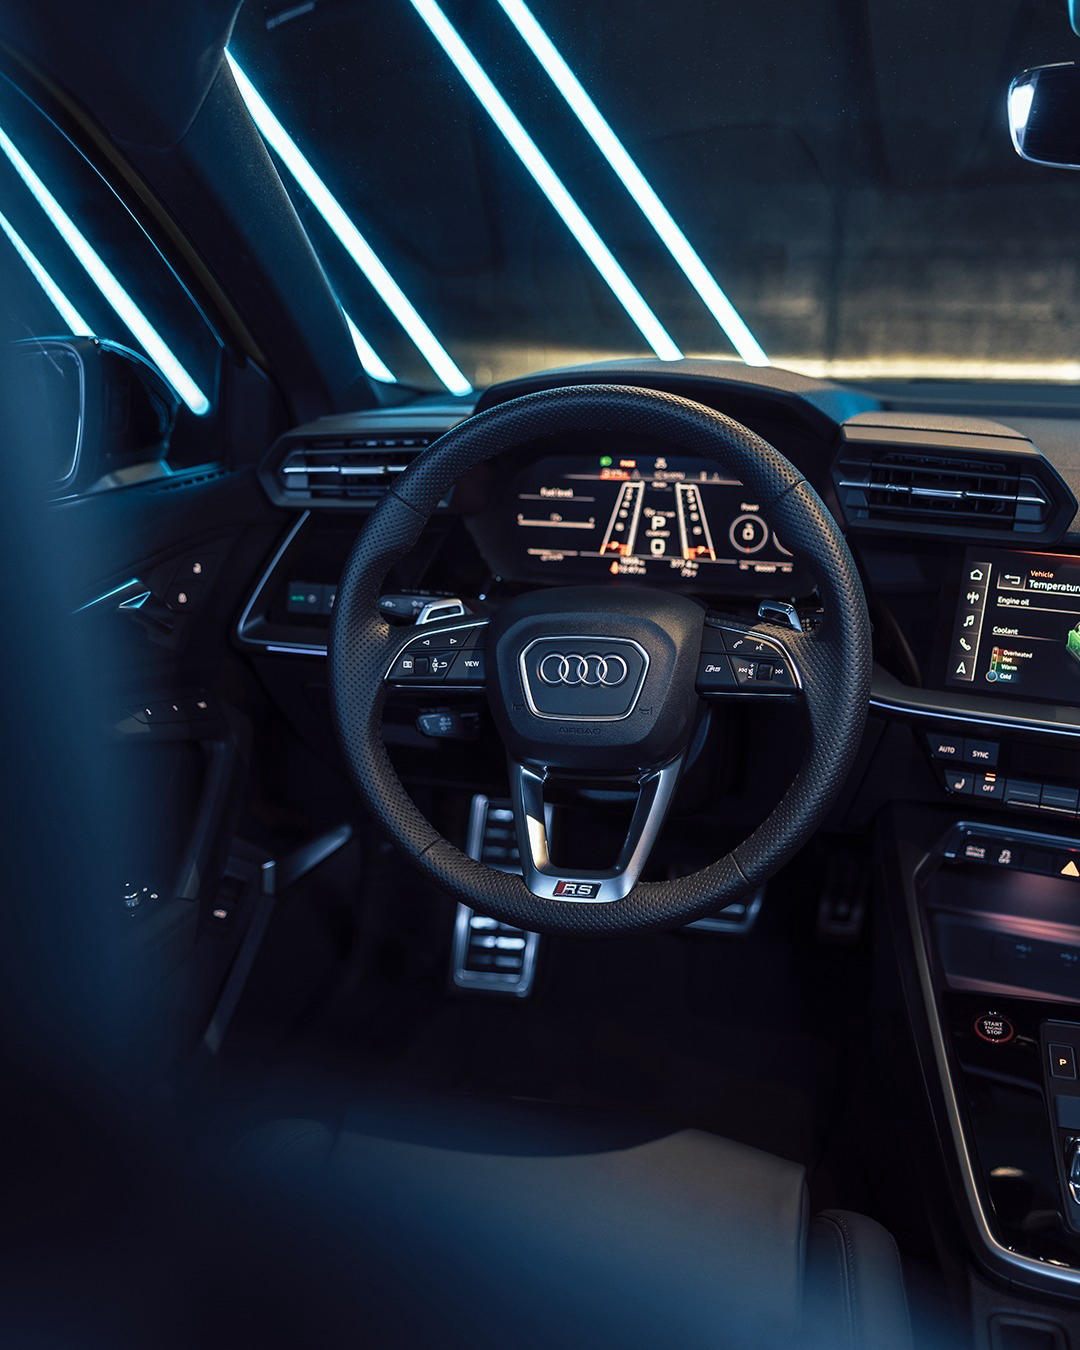 Audi USA - Correctly hold the steering wheel by placing your hands on 9 and RS 3 o’clock